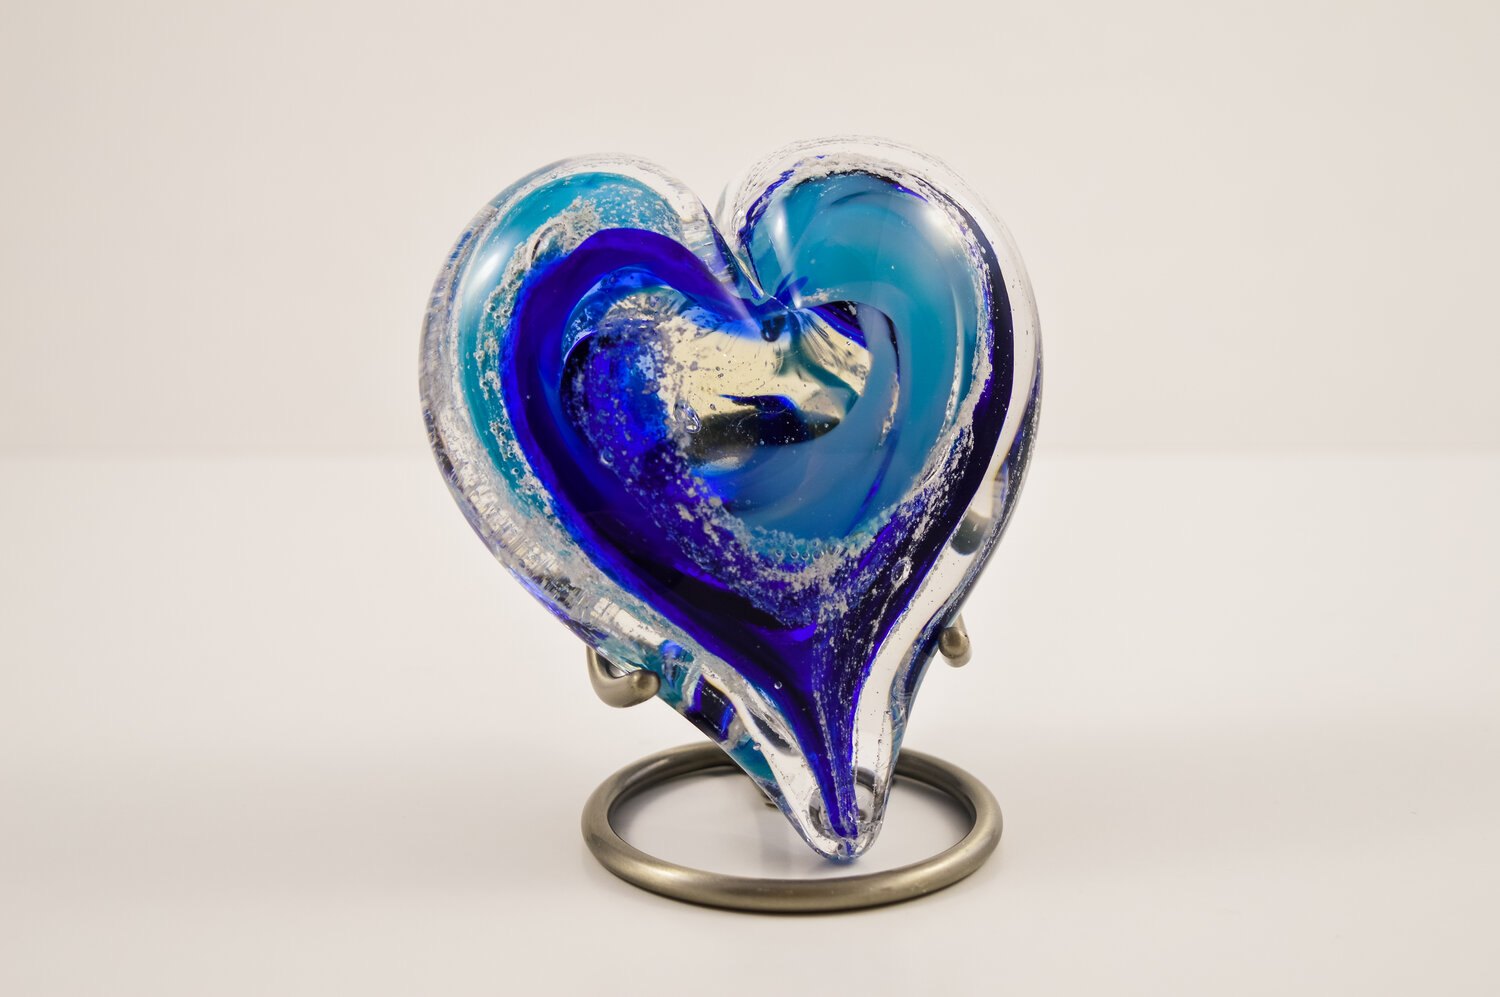 Glass Heart with Ashes